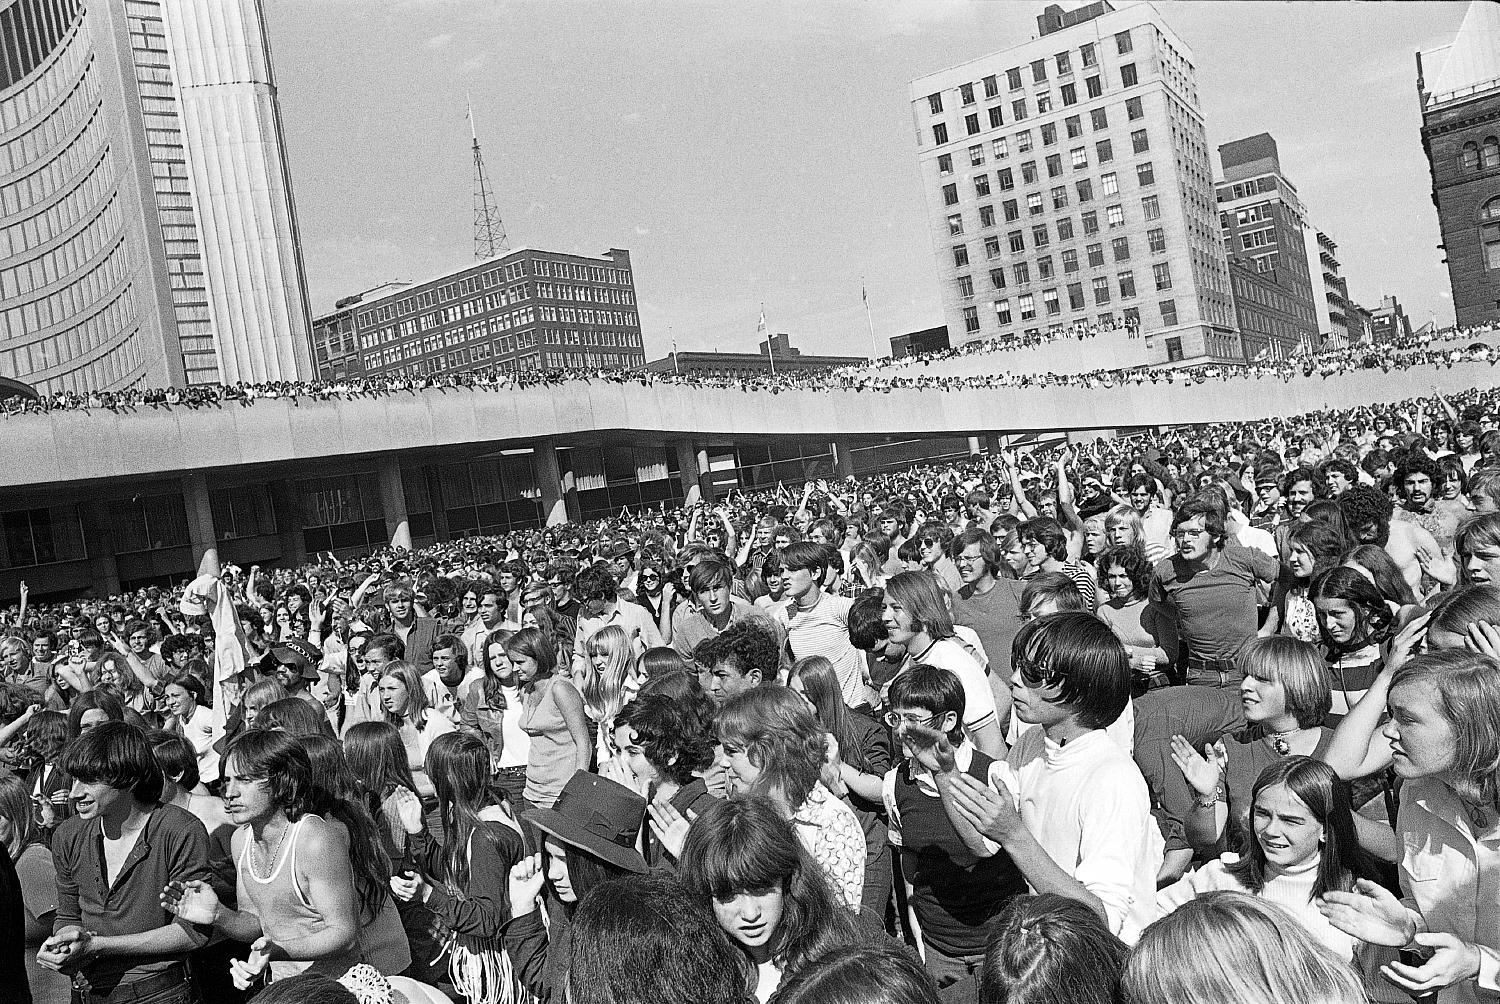 Crowd at Lighthouse Concert at City Hall, Toronto, 1970.